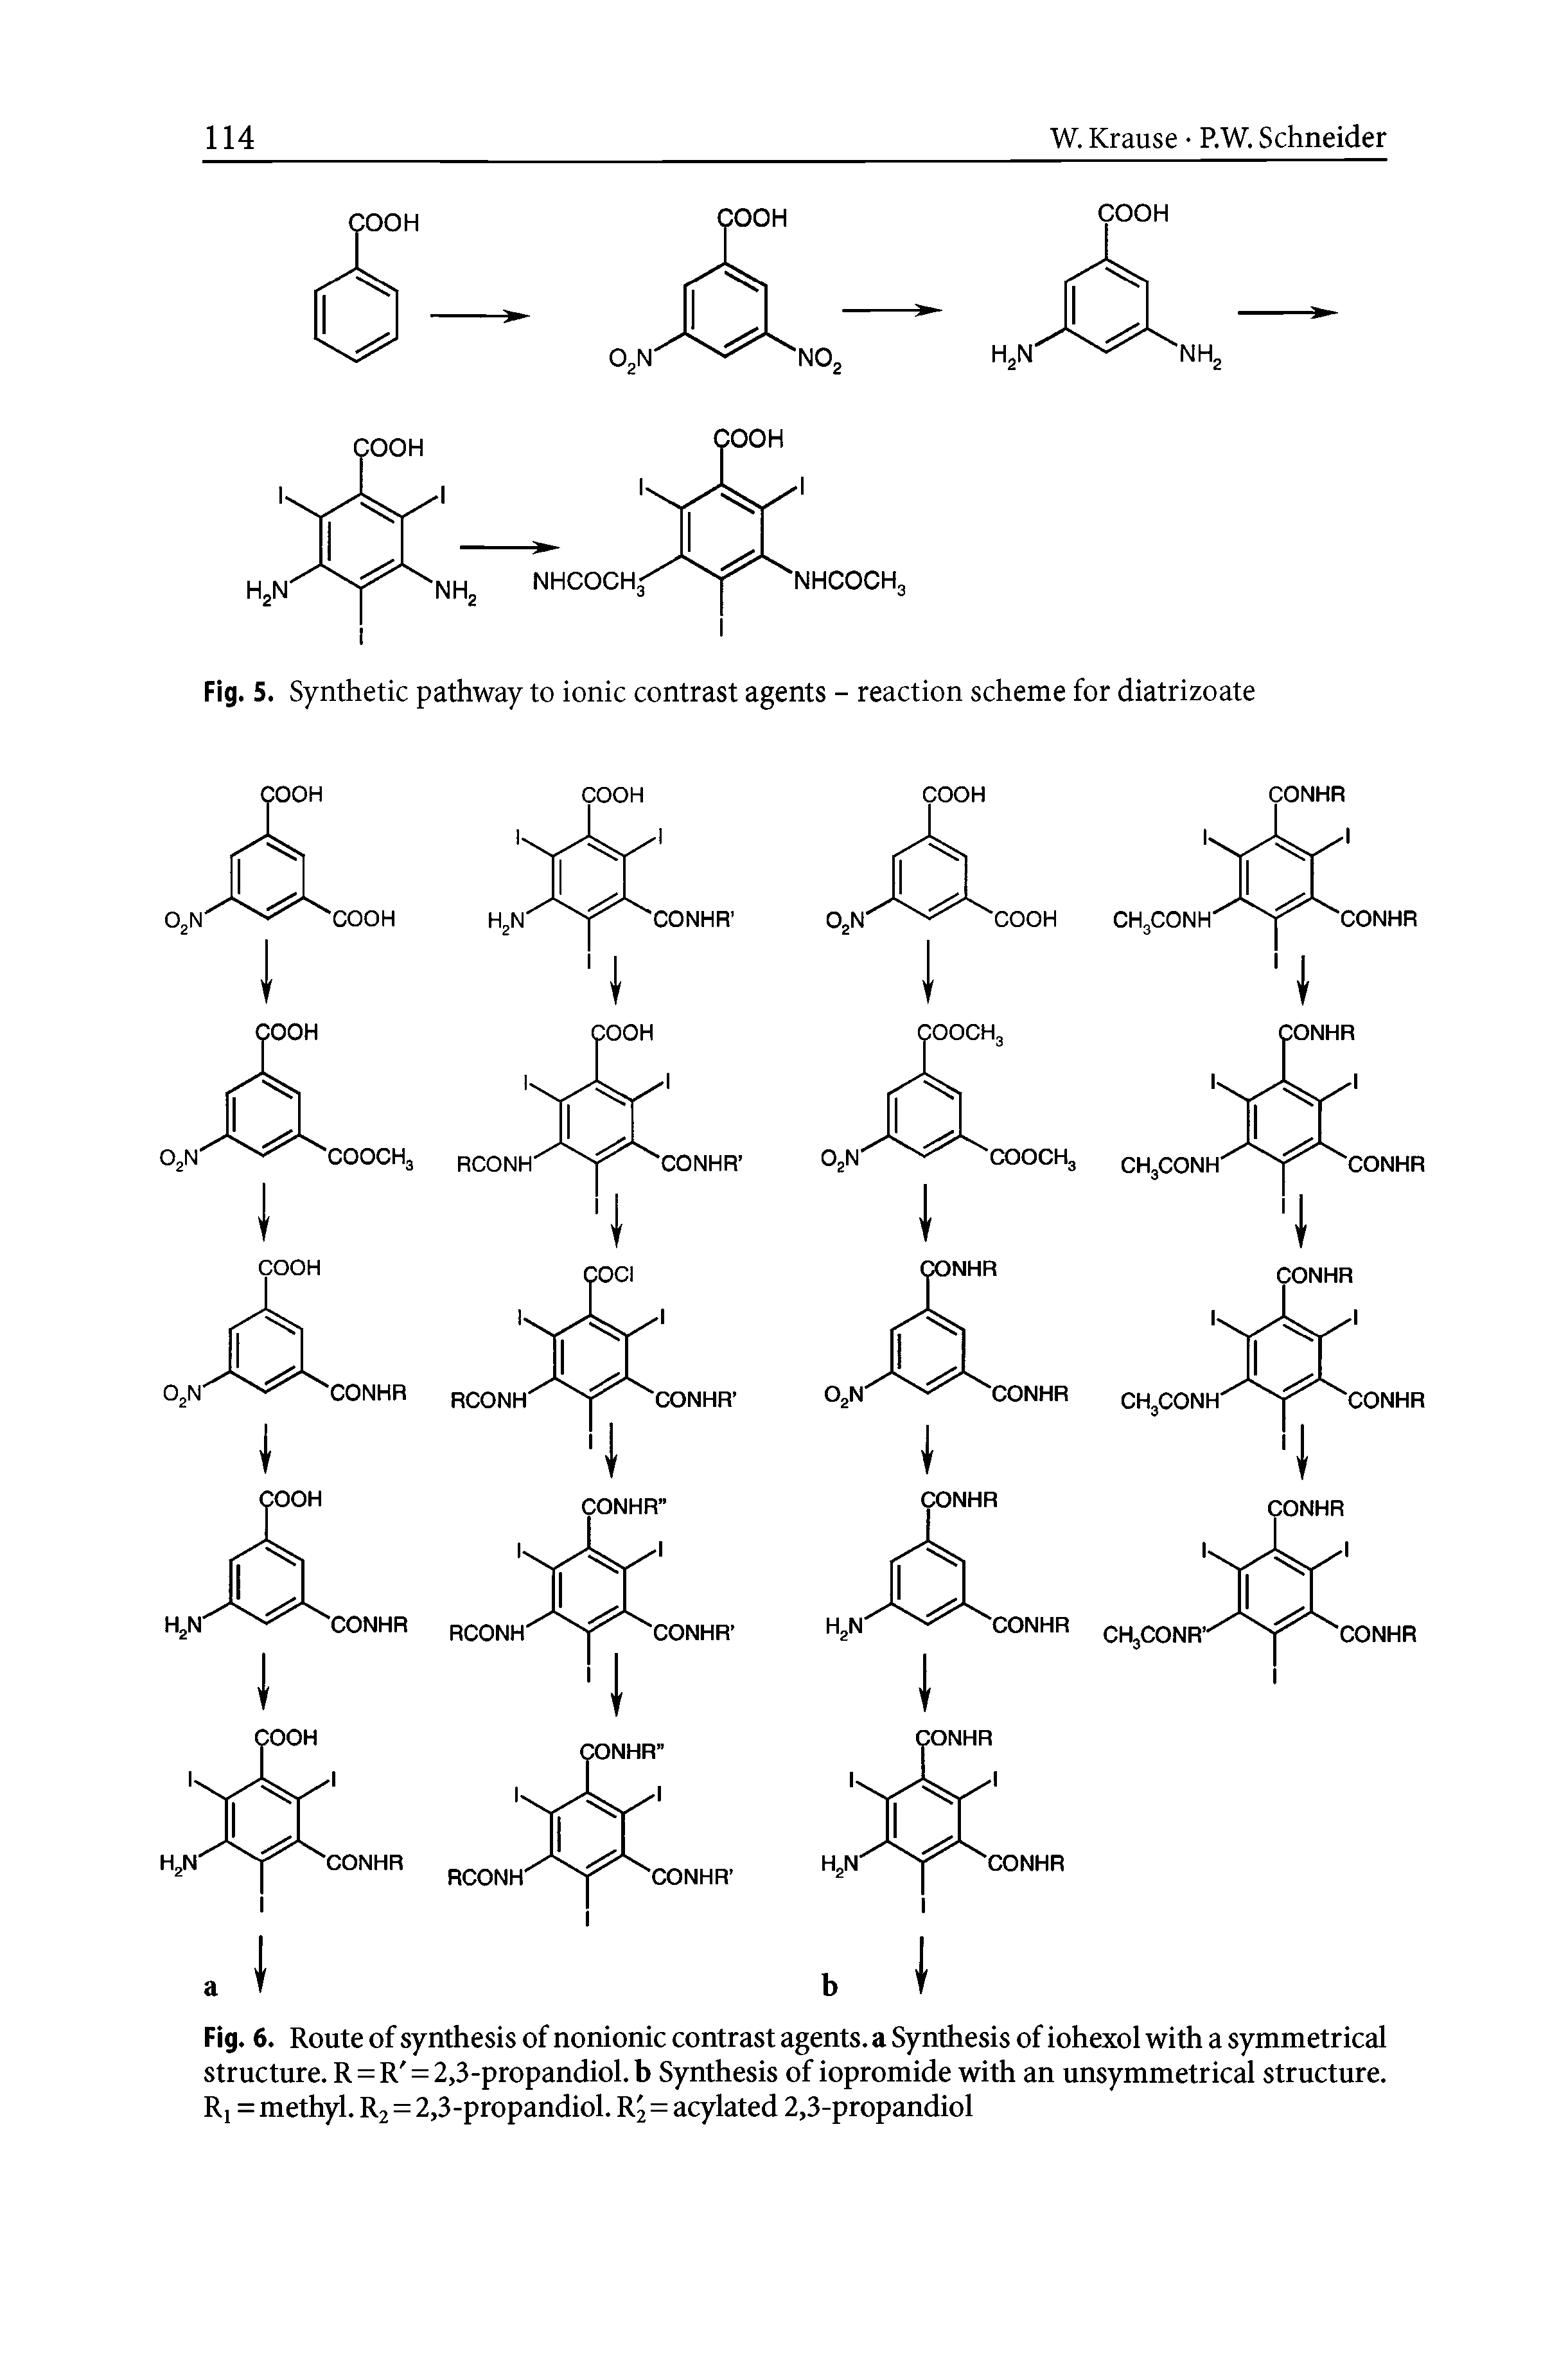 Fig. 6. Route of synthesis of nonionic contrast agents, a Synthesis of iohexol with a symmetrical structure. R = R = 2,3-propandiol.b Synthesis of iopromide with an unsymmetrical structure. Ri = methyl. R2 = 2,3-propandiol. R2=acylated 2,3-propandiol...